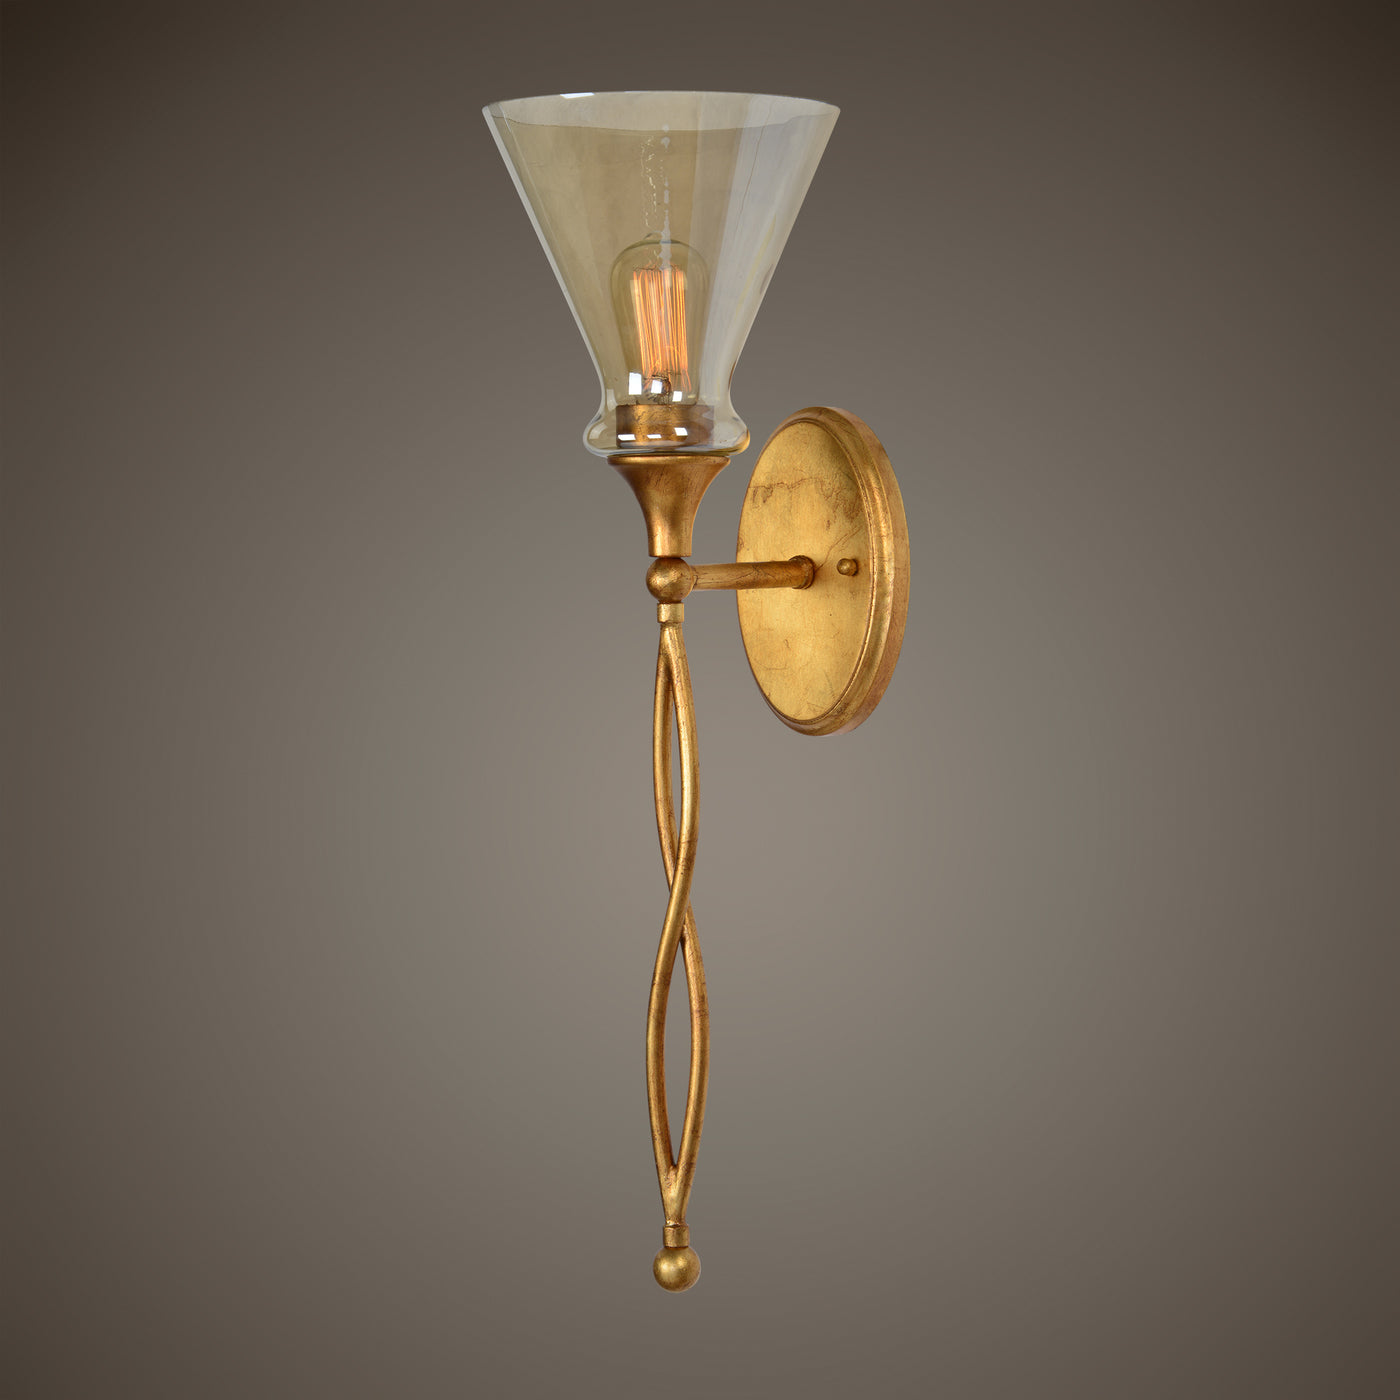 A Glamorous Sconce With An Infinity Design In The Metal Work Of The Tail.  The Rich Antiqued Gold Leaf Finish Complements ...